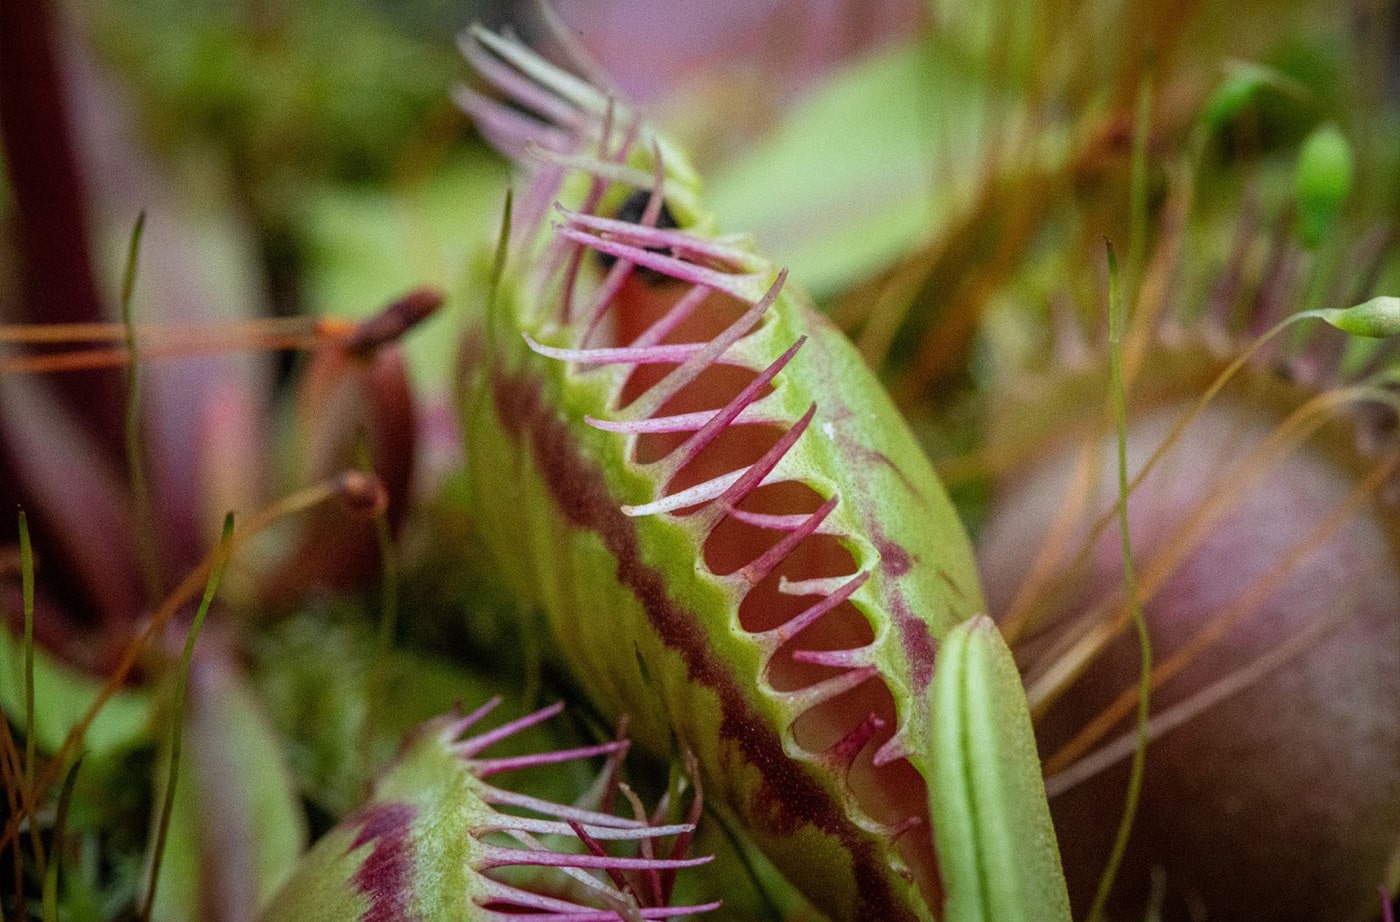 Centered is a venus flytrap with its teeth closed and more flytraps and grass surrounding it.